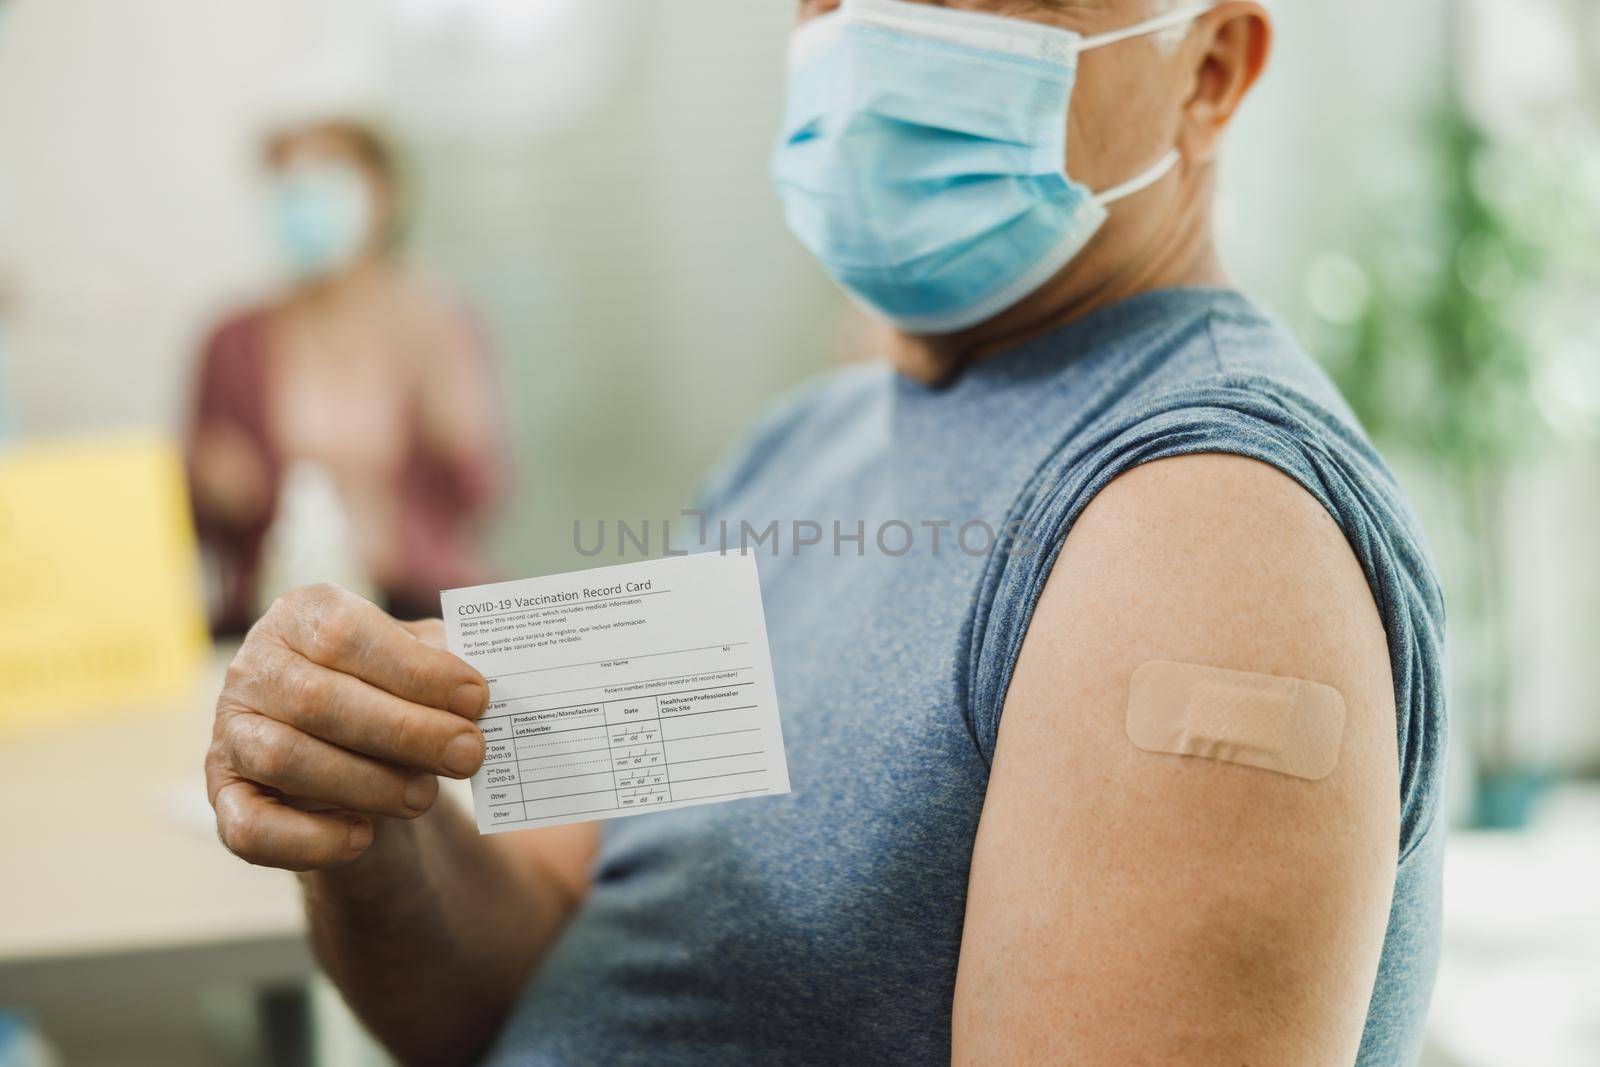 Senior Man Holding Covid-19 Vaccination Record Card by MilanMarkovic78